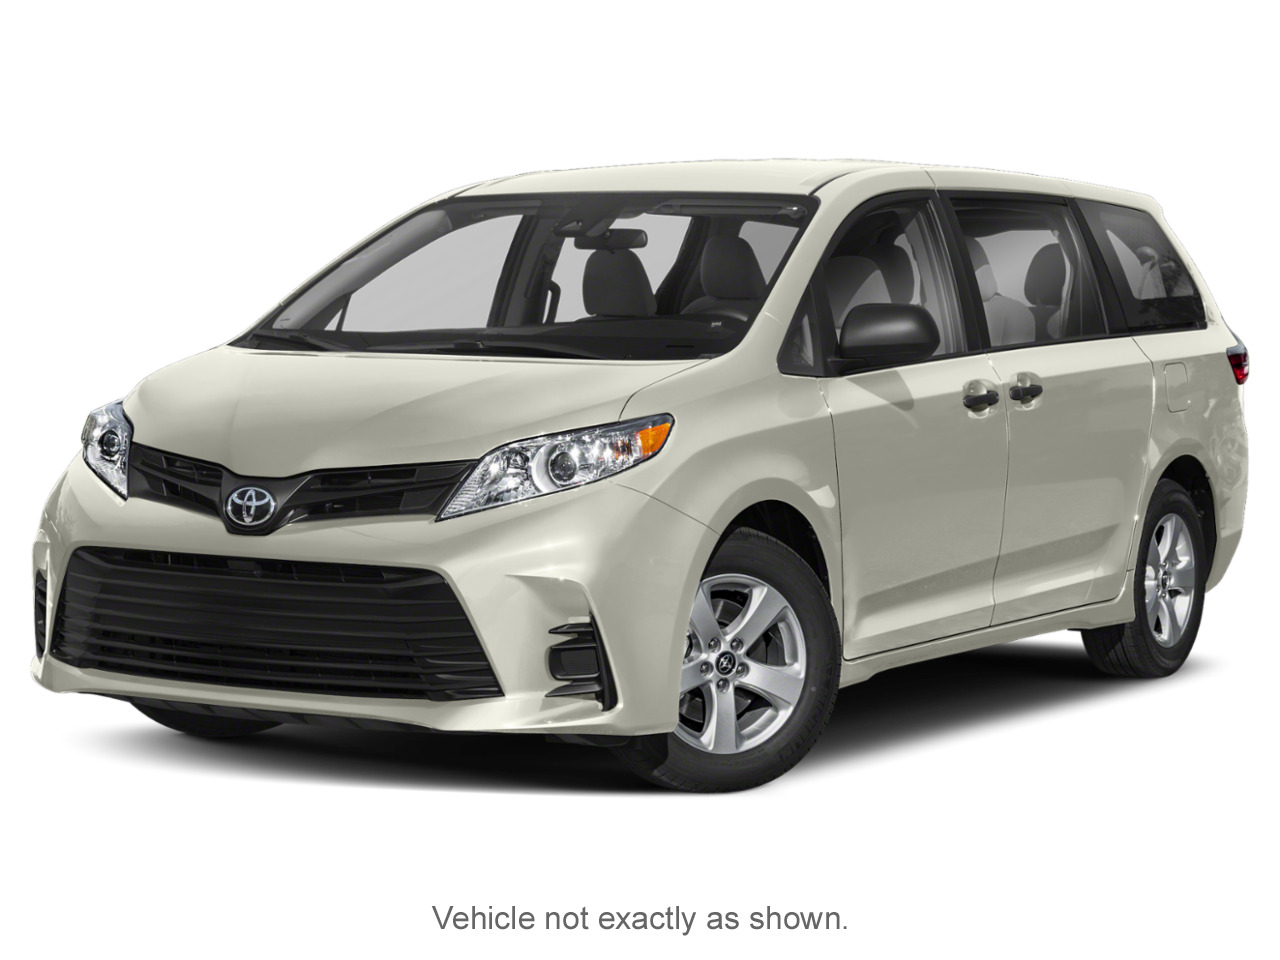 2019 Toyota Sienna XLE AWD 7-Passenger V6 |XLE PACKAGE|